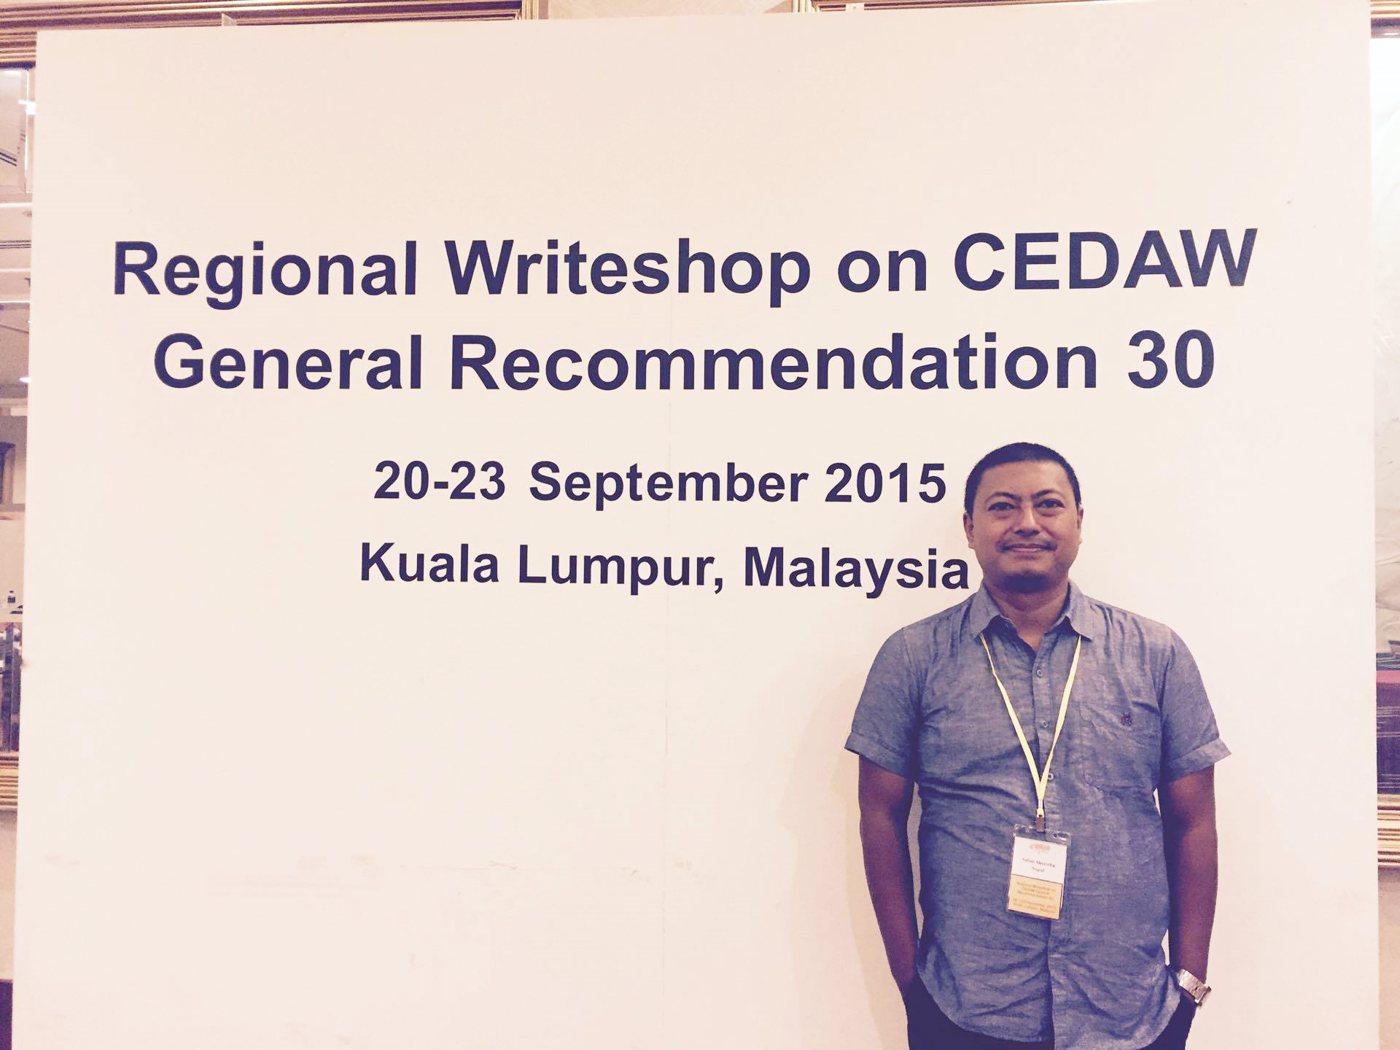 Advocate Sabin Shrestha, Executive Director of FWLD participating in the Regional Writeshop on CEDAW in September 2015